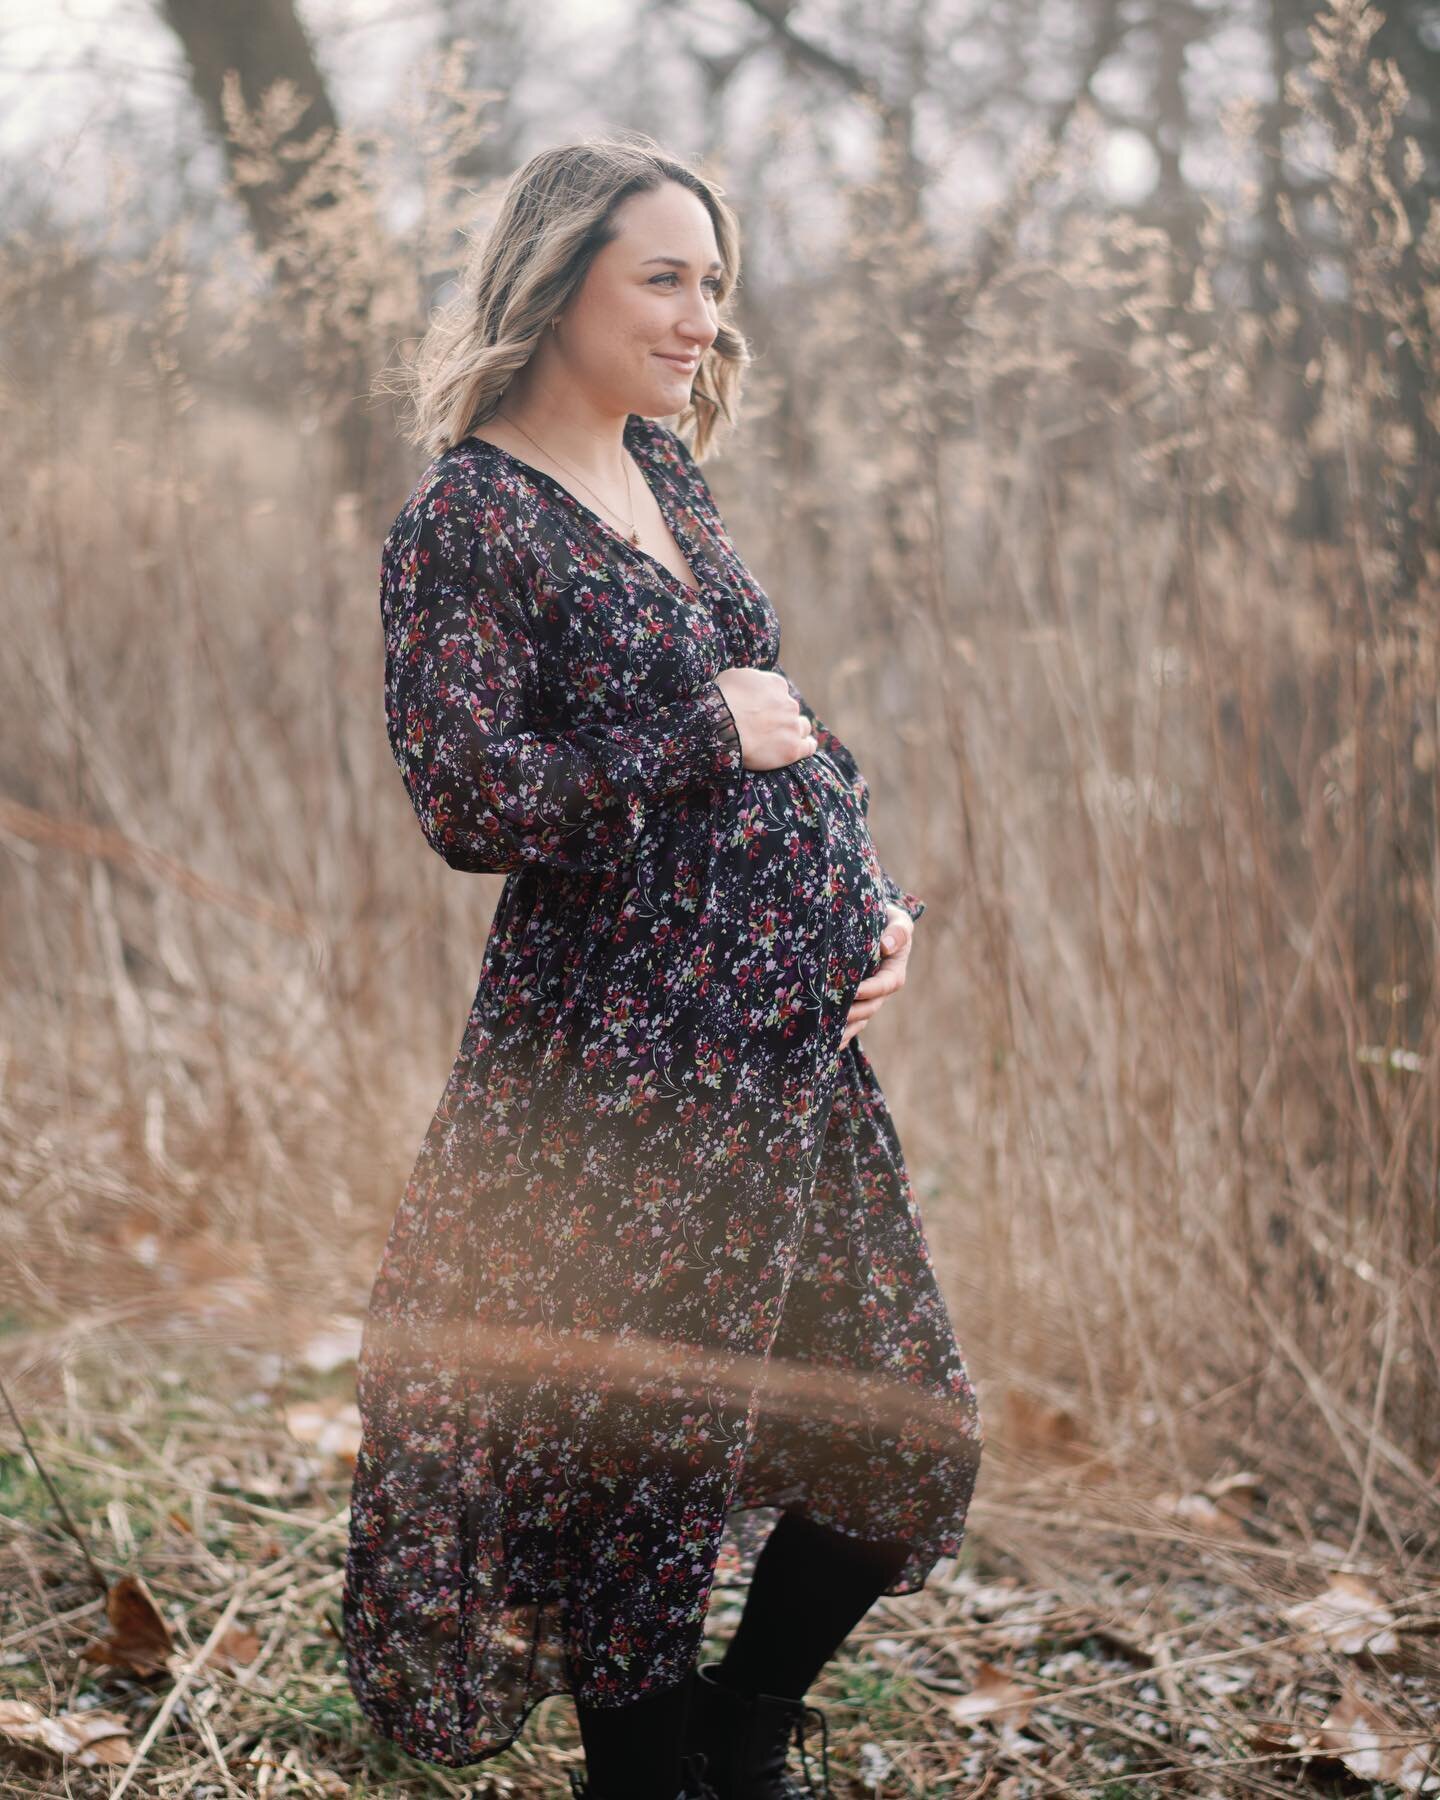 It&rsquo;s baby girl&rsquo;s birth month! We&rsquo;re getting excited to meet this little nugget. I apologize in advance for any slow e-mail responses from March-May. Baby girl and I have been taking it slow lately. I still have some open dates for t